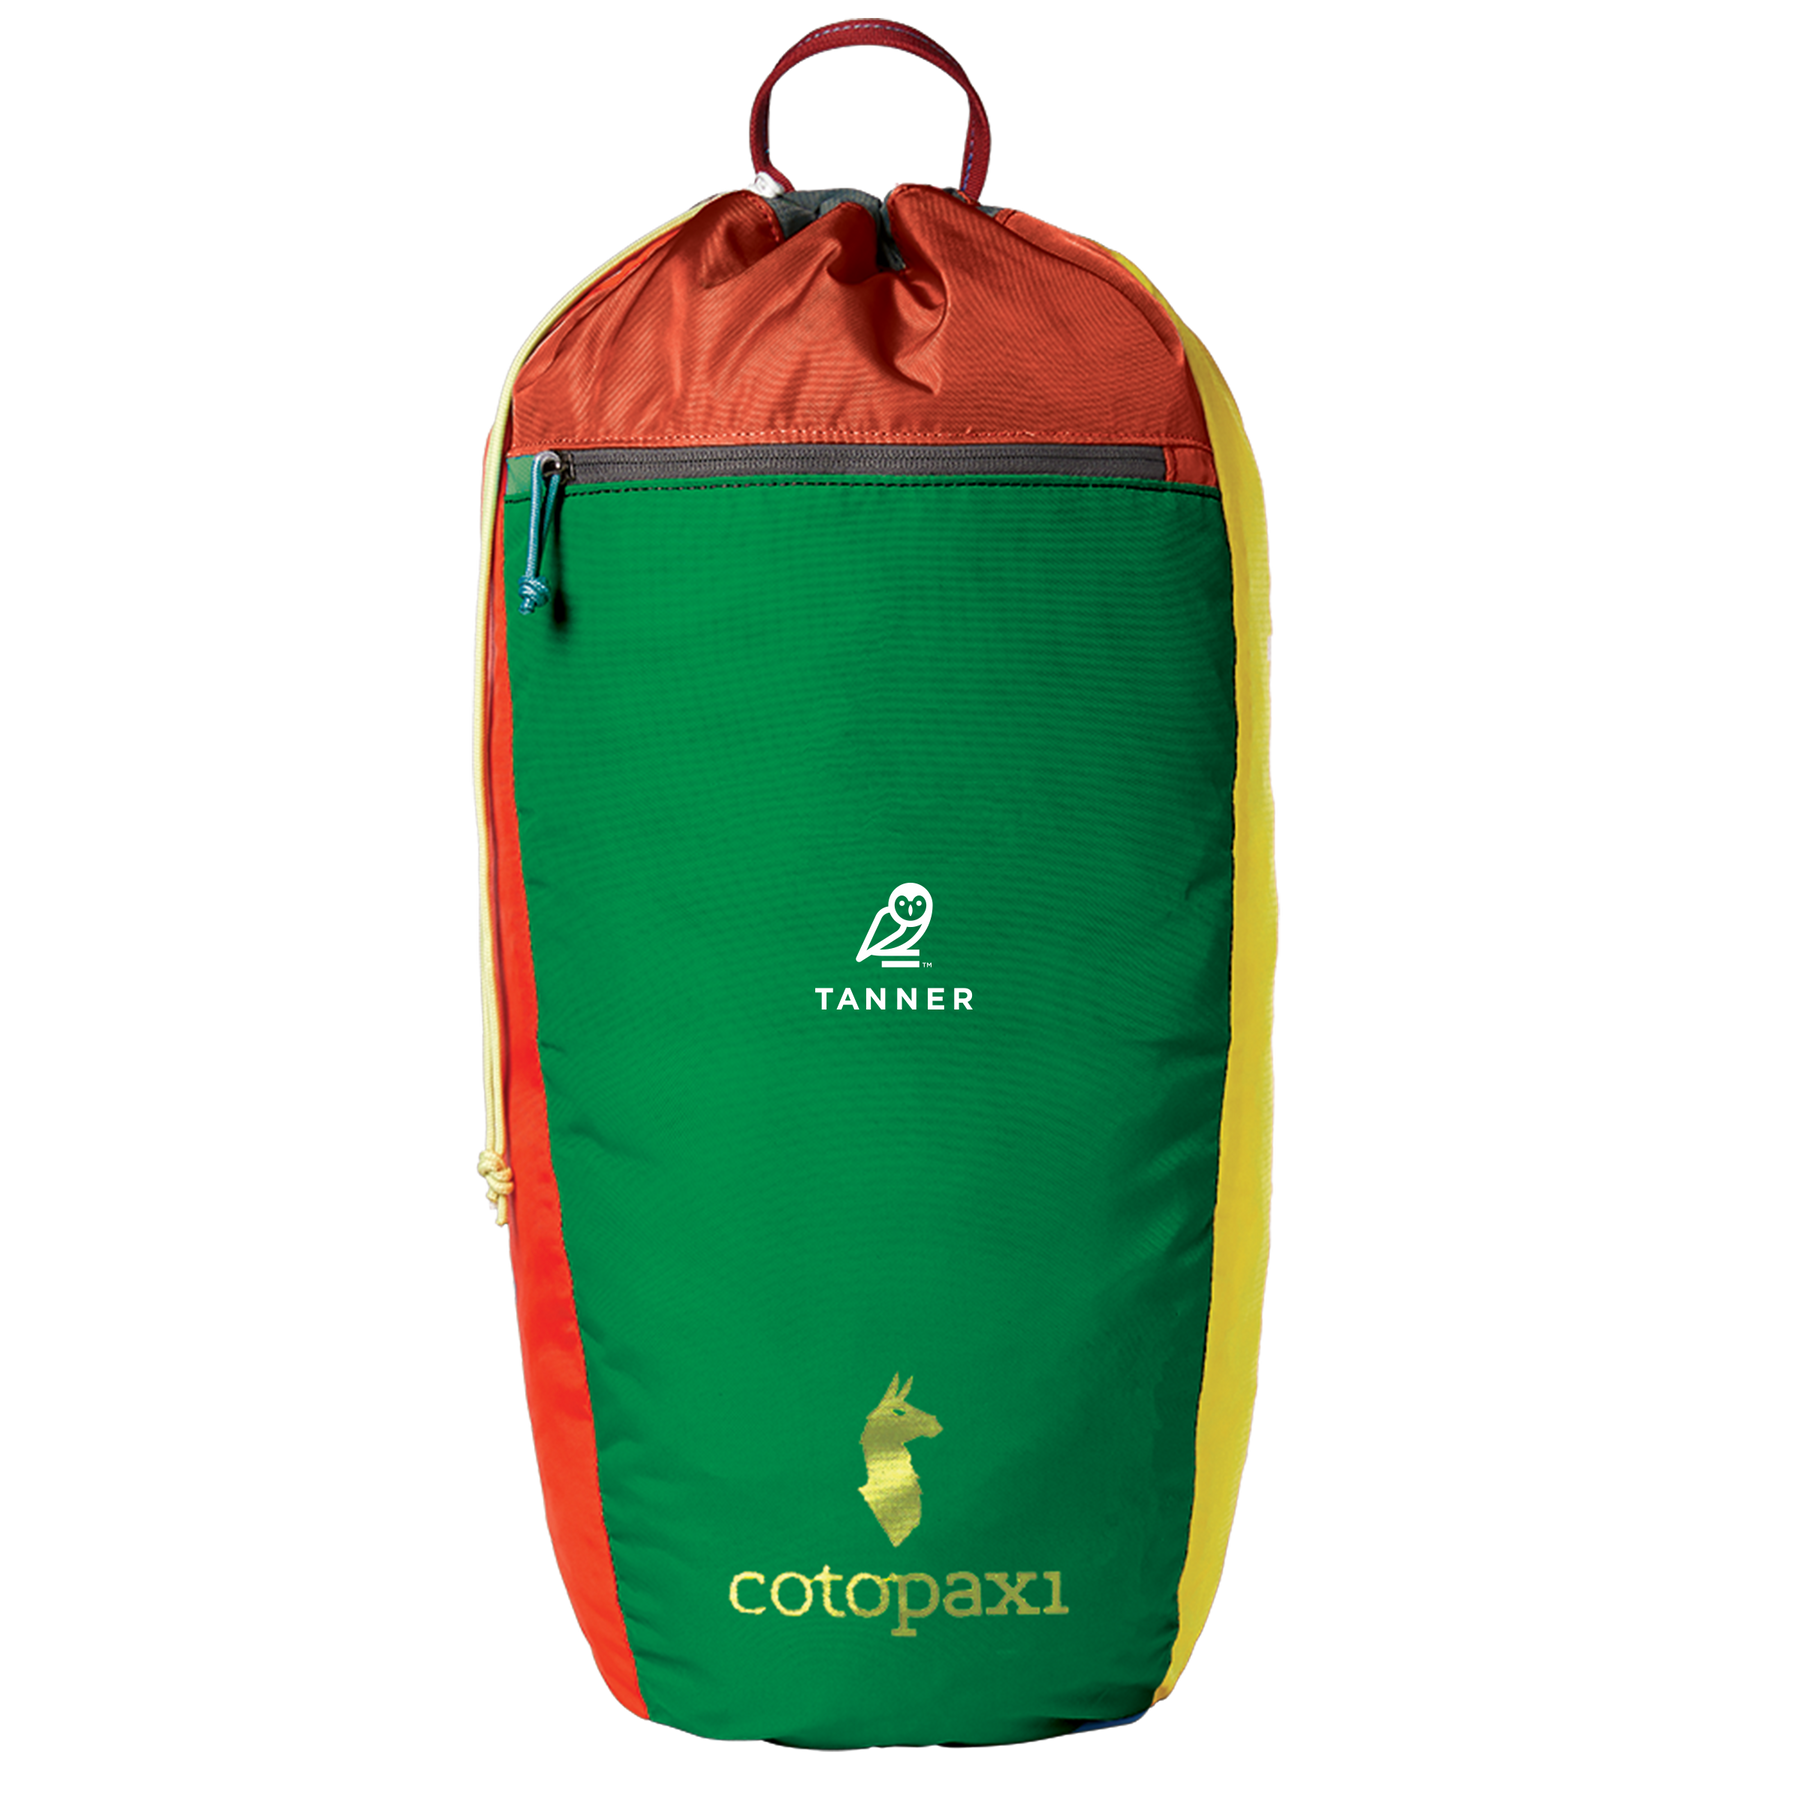 Cotopaxi Luzon Backpack – Tanner Shop